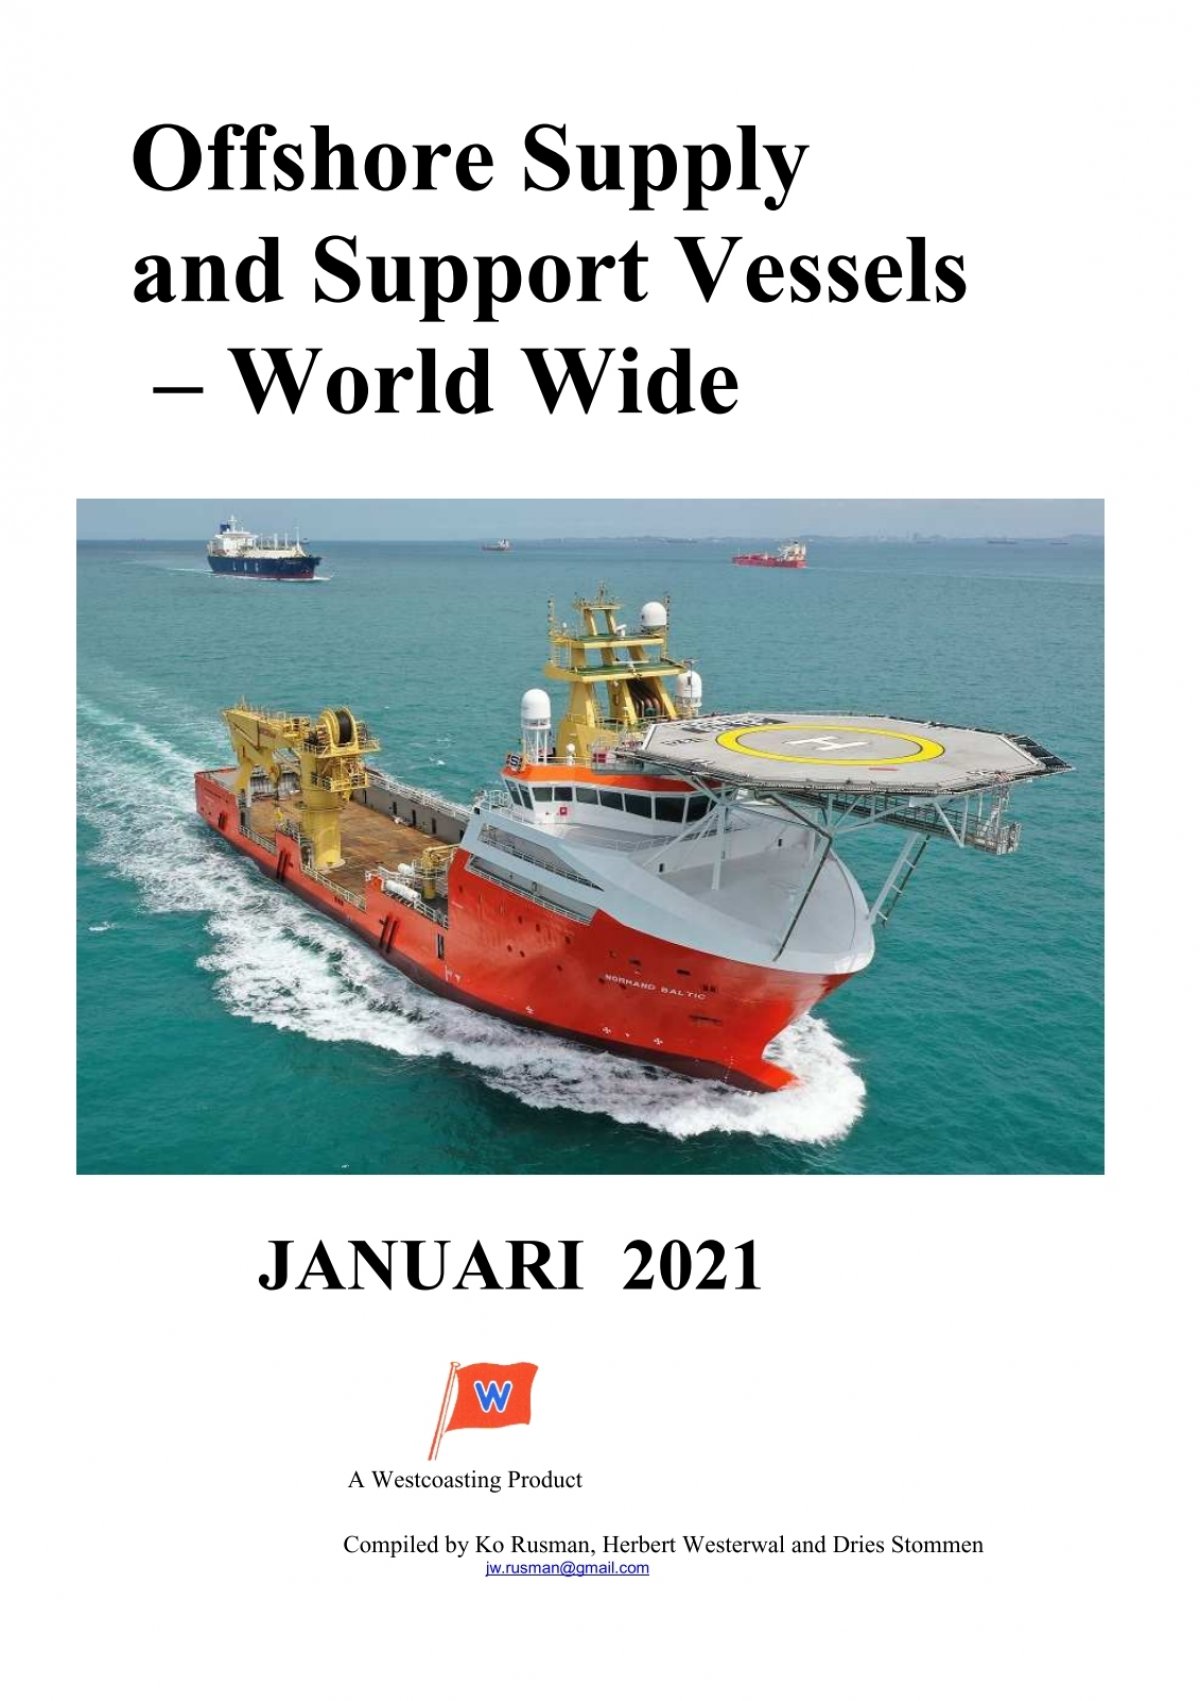 Offshore Supply And Support Vessels World Wide Januari 2021